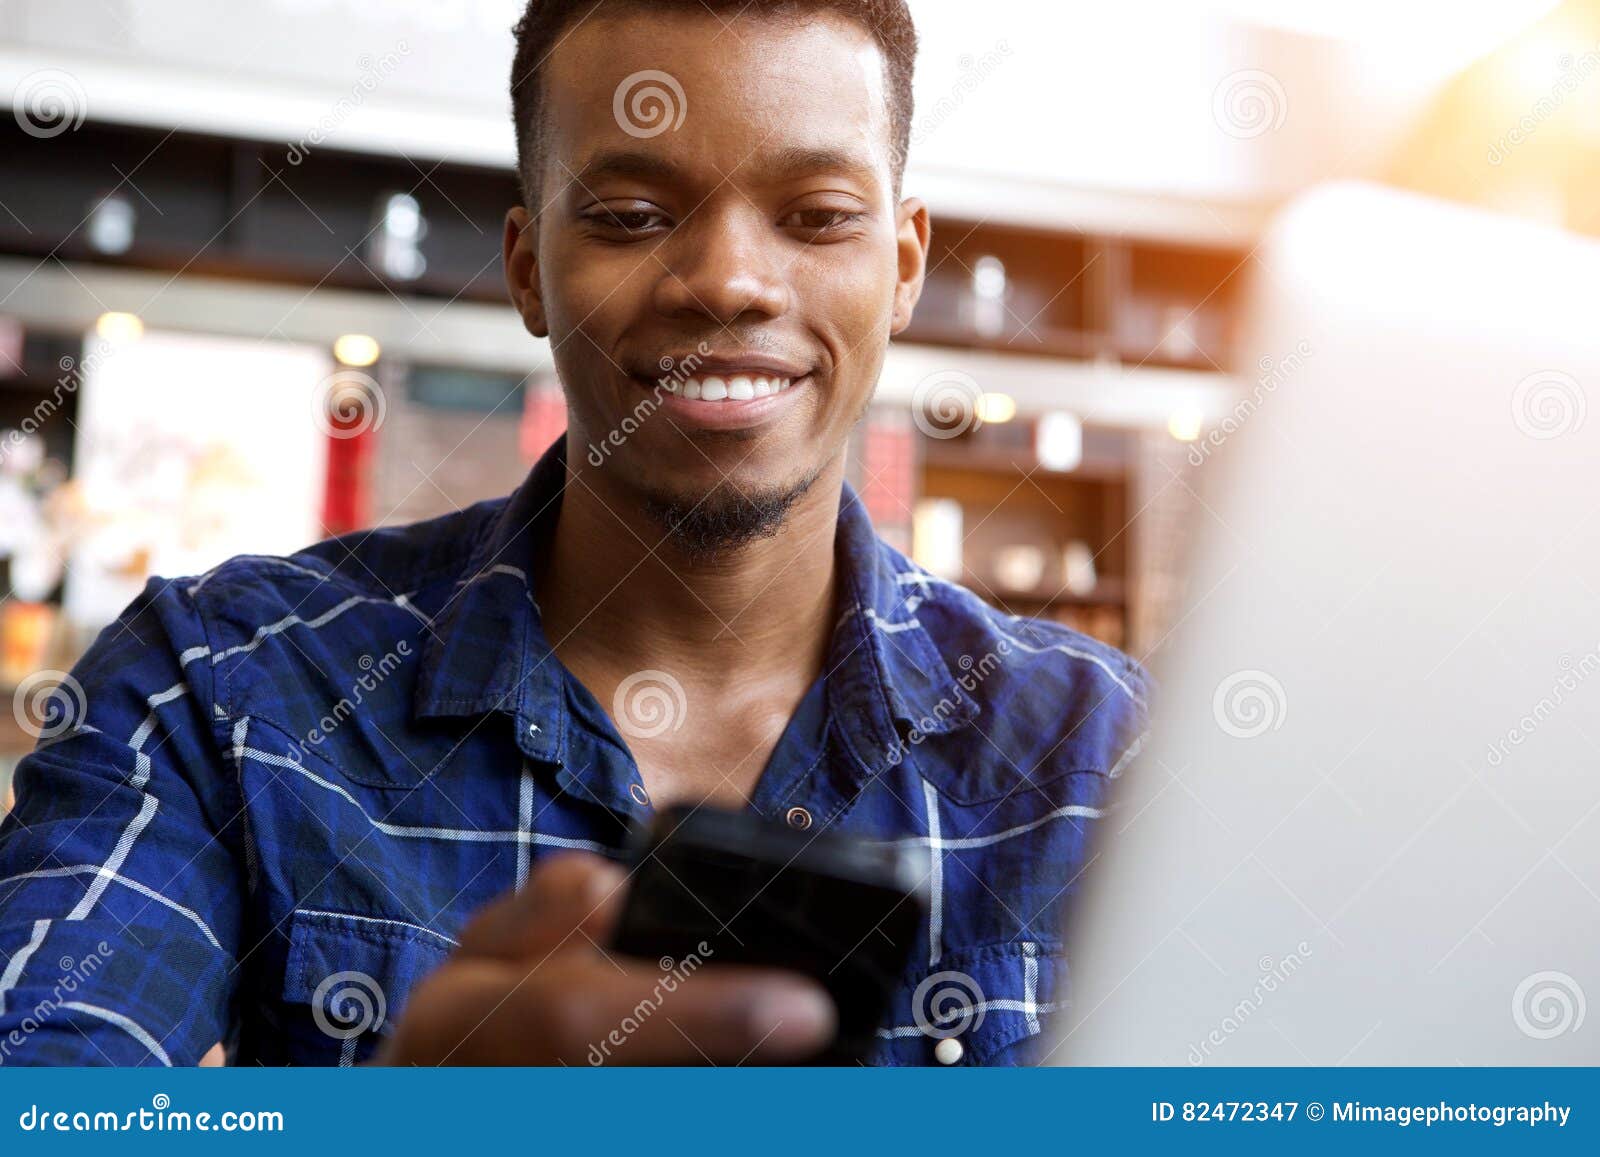 attractive young man with cellphone and laptop in cafe